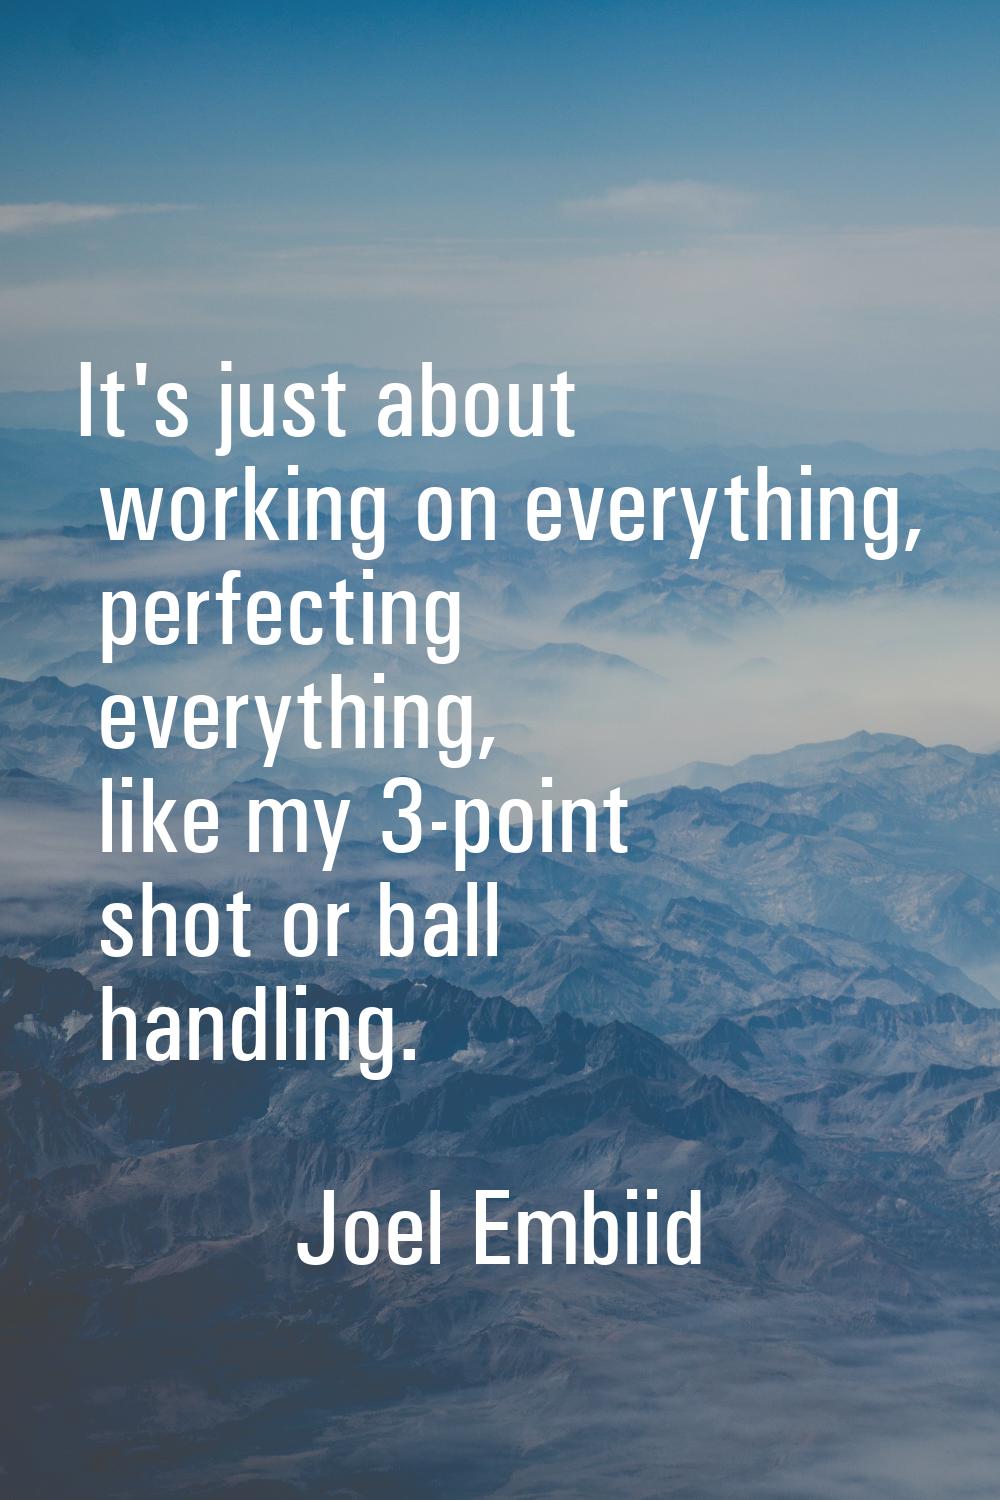 It's just about working on everything, perfecting everything, like my 3-point shot or ball handling